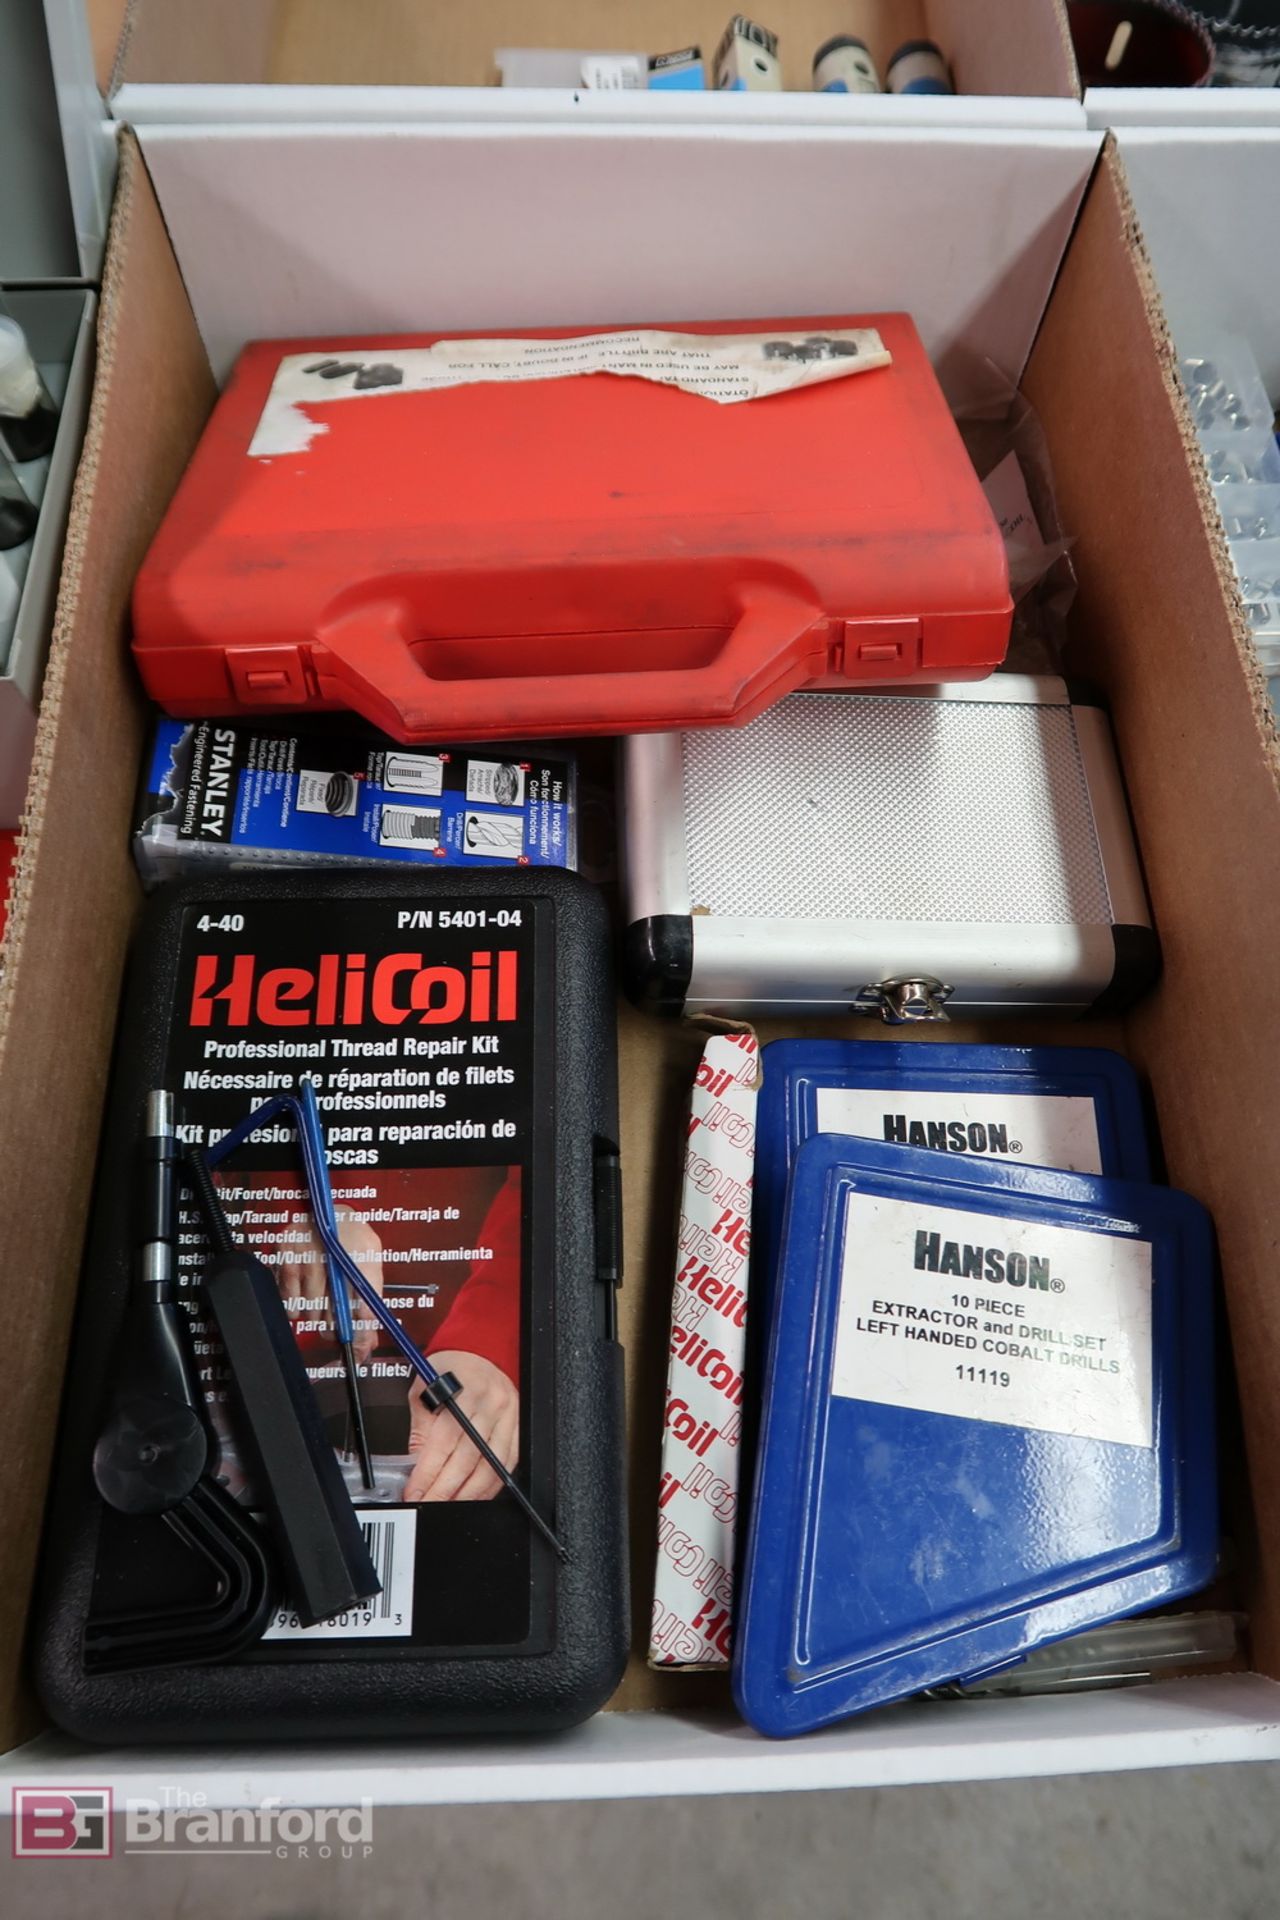 Box w/ Helicoil Thread Repair Kit, Hanson Extractor & Drill Sets, Helicoils